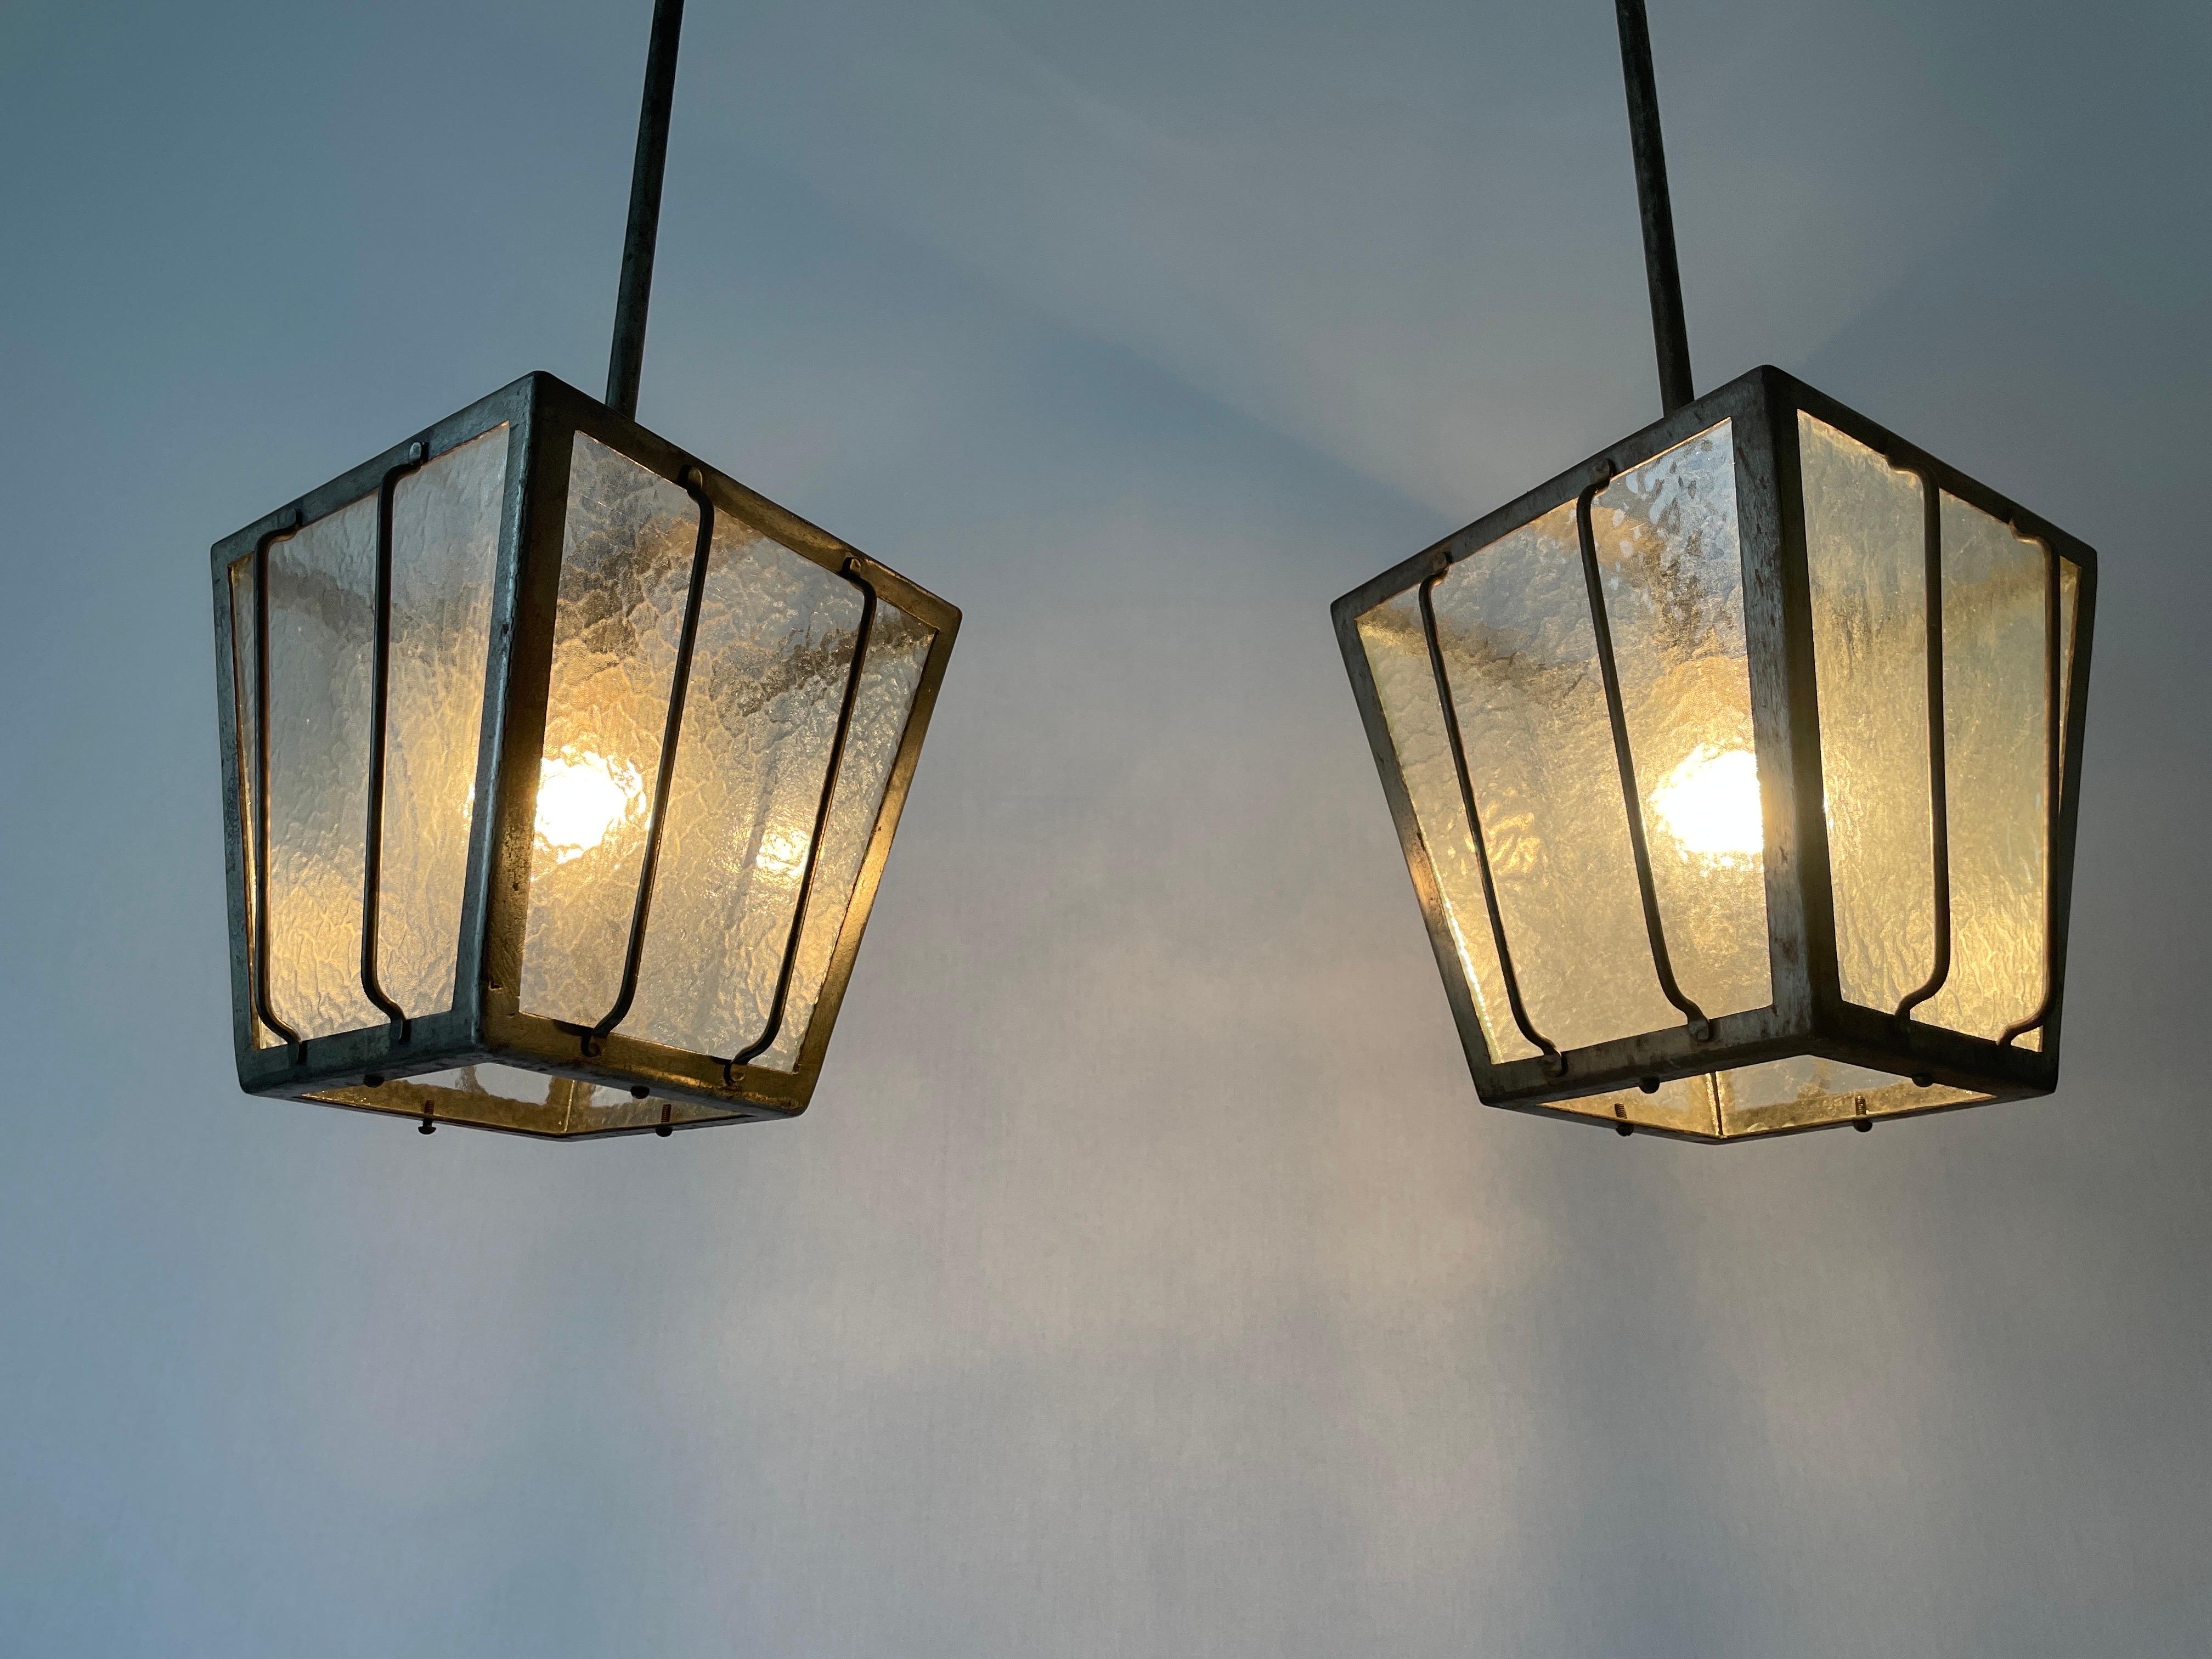 Frosted Glass Milano Apartment Pair of Ceiling Lamps, 1950s, Italy For Sale 6